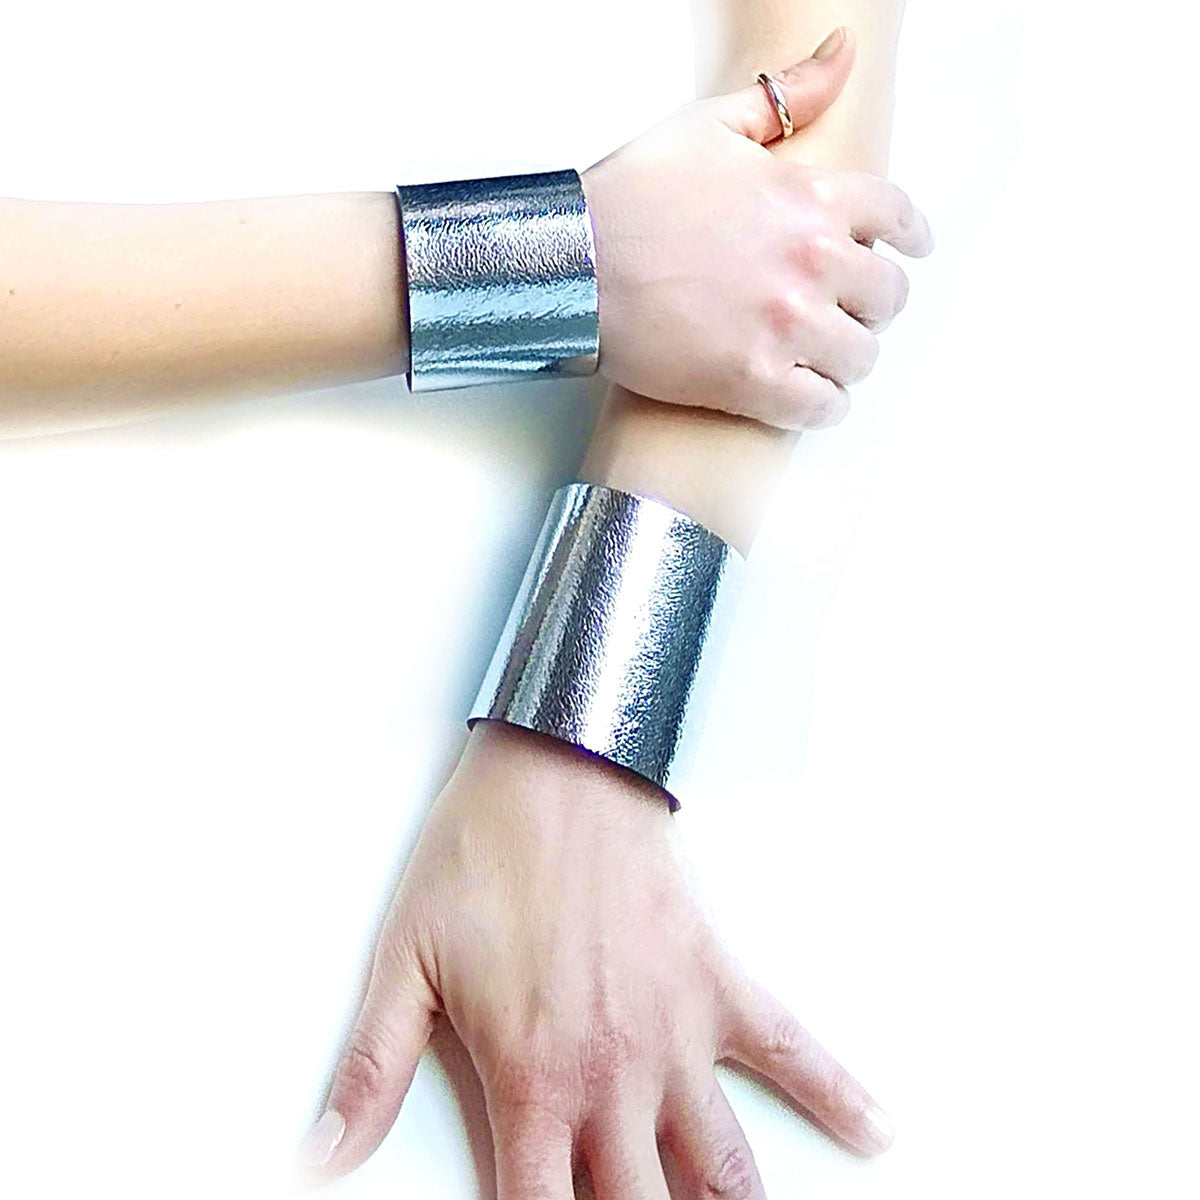 Black genuine leather cuff for men and women | Bangkok